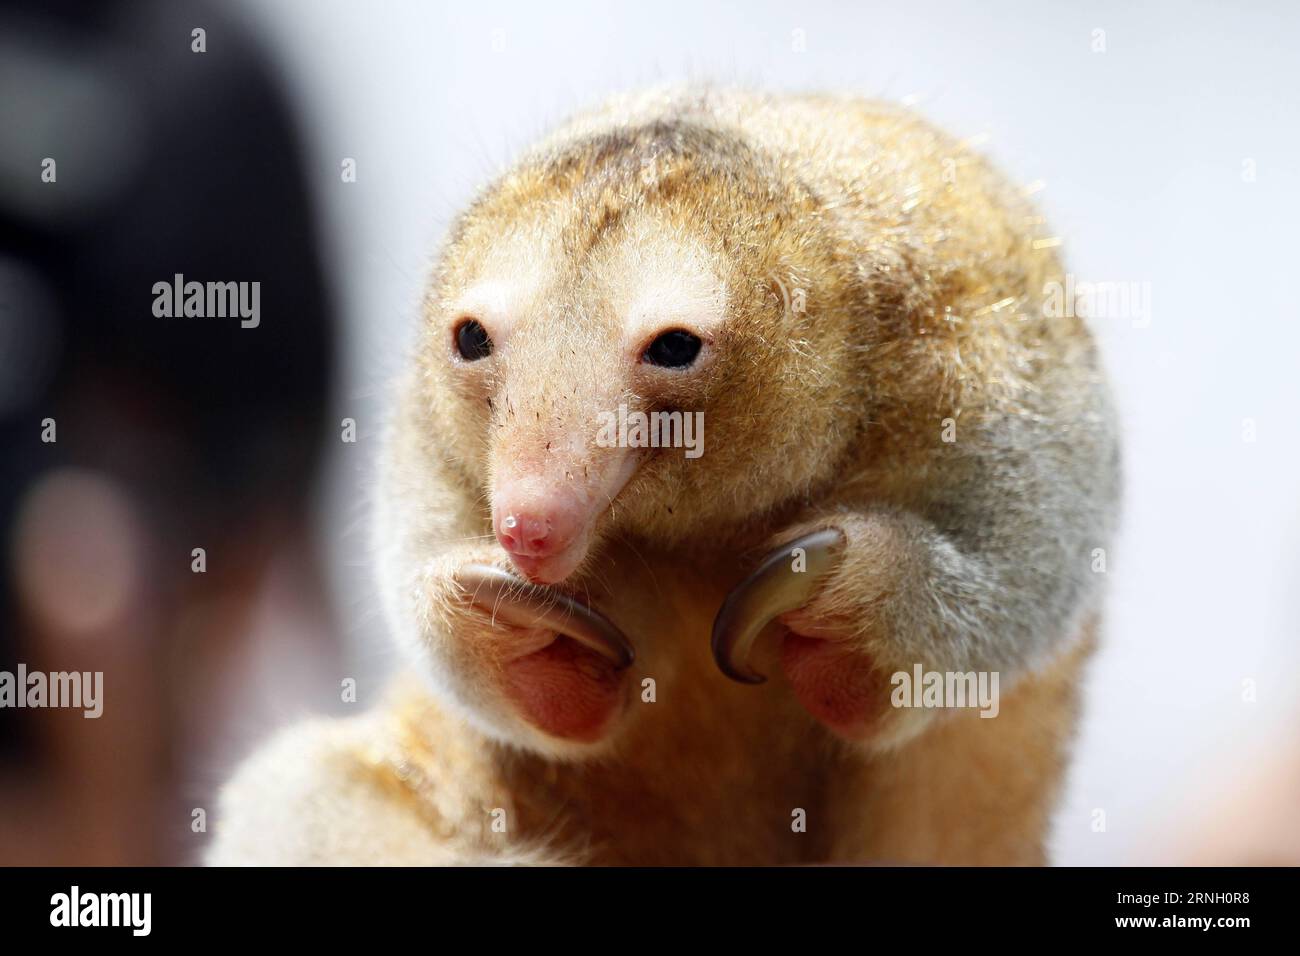 Ameisenbären im Zoo von Lima, Peru (161020) -- LIMA, Oct. 19, 2016 -- Photo taken on Oct. 19, 2016 shows a silky anteater at the Huachipa Zoo in Lima, Peru. The zoo presented three anteater species on Wednesday. Luis Camacho) (da) (fnc)(zcc) PERU-LIMA-ENVIRONMENT-FAUNA e LuisxCamacho PUBLICATIONxNOTxINxCHN   Anteaters in Zoo from Lima Peru  Lima OCT 19 2016 Photo Taken ON OCT 19 2016 Shows a Silky anteater AT The huachipa Zoo in Lima Peru The Zoo presented Three anteater Species ON Wednesday Luis Camacho there FNC ZCC Peru Lima Environment Fauna e LuisxCamacho PUBLICATIONxNOTxINxCHN Stock Photo